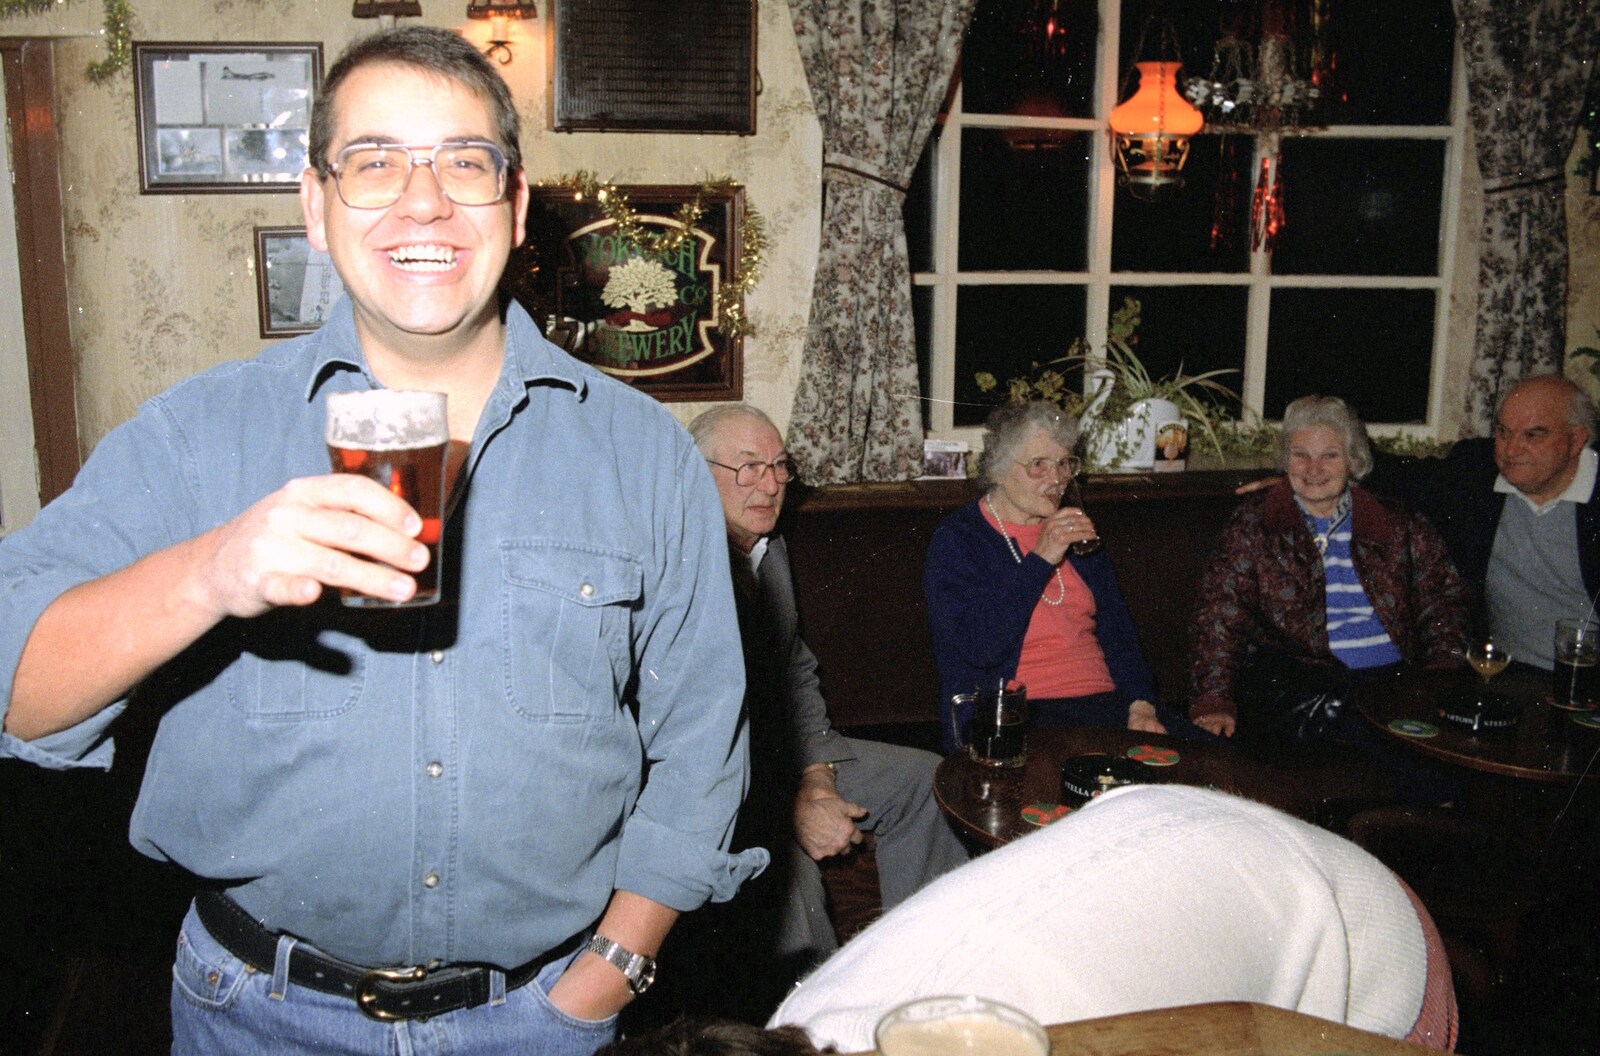 Roger holds a beer up as Pippa ducks from New Year's Eve at the Swan Inn, Brome, Suffolk - 31st December 1994